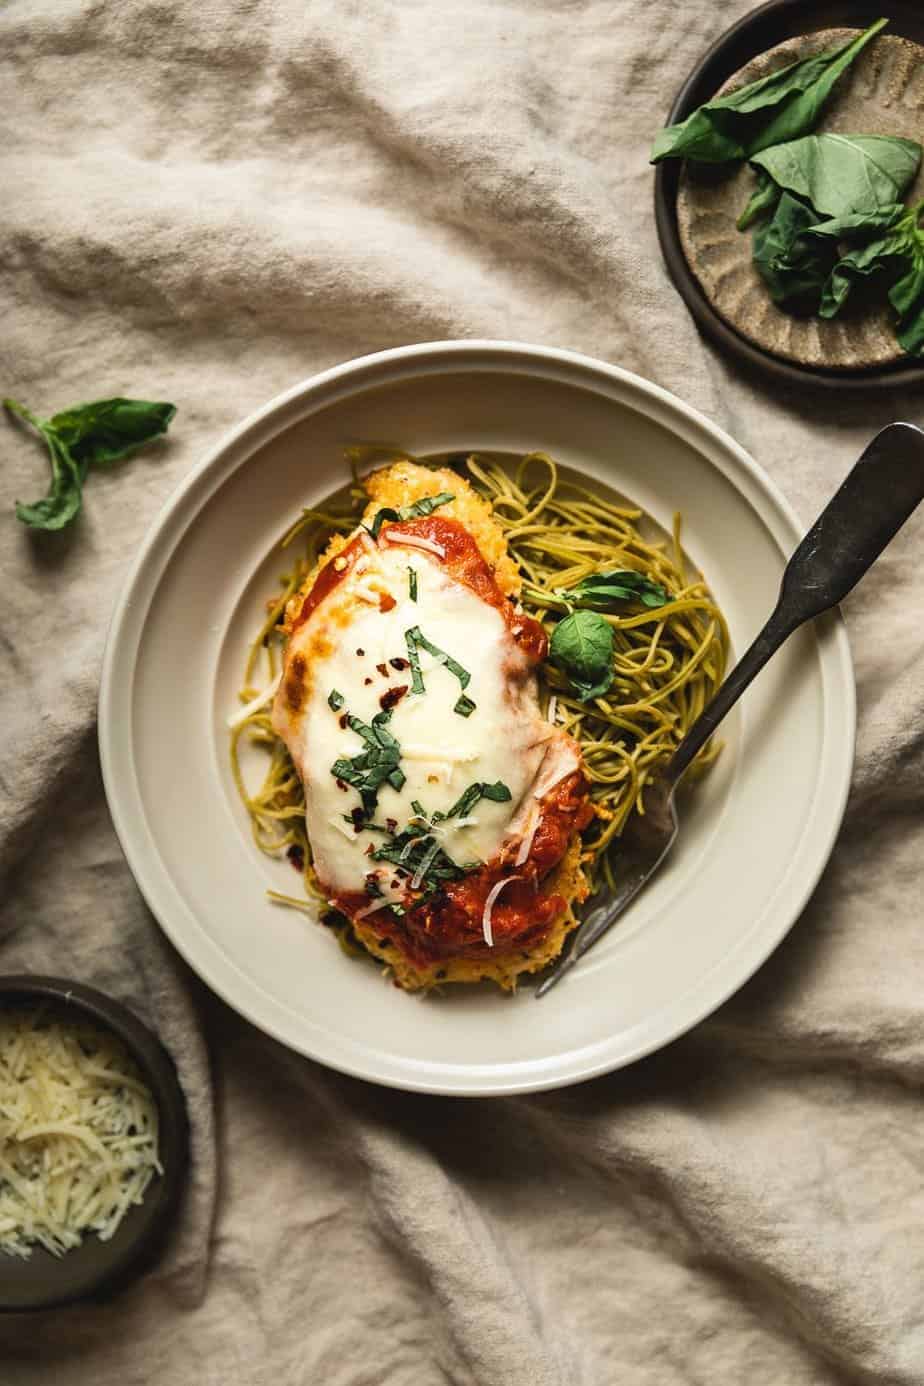 Keto chicken parmesan on a bed of low-carb noodles.